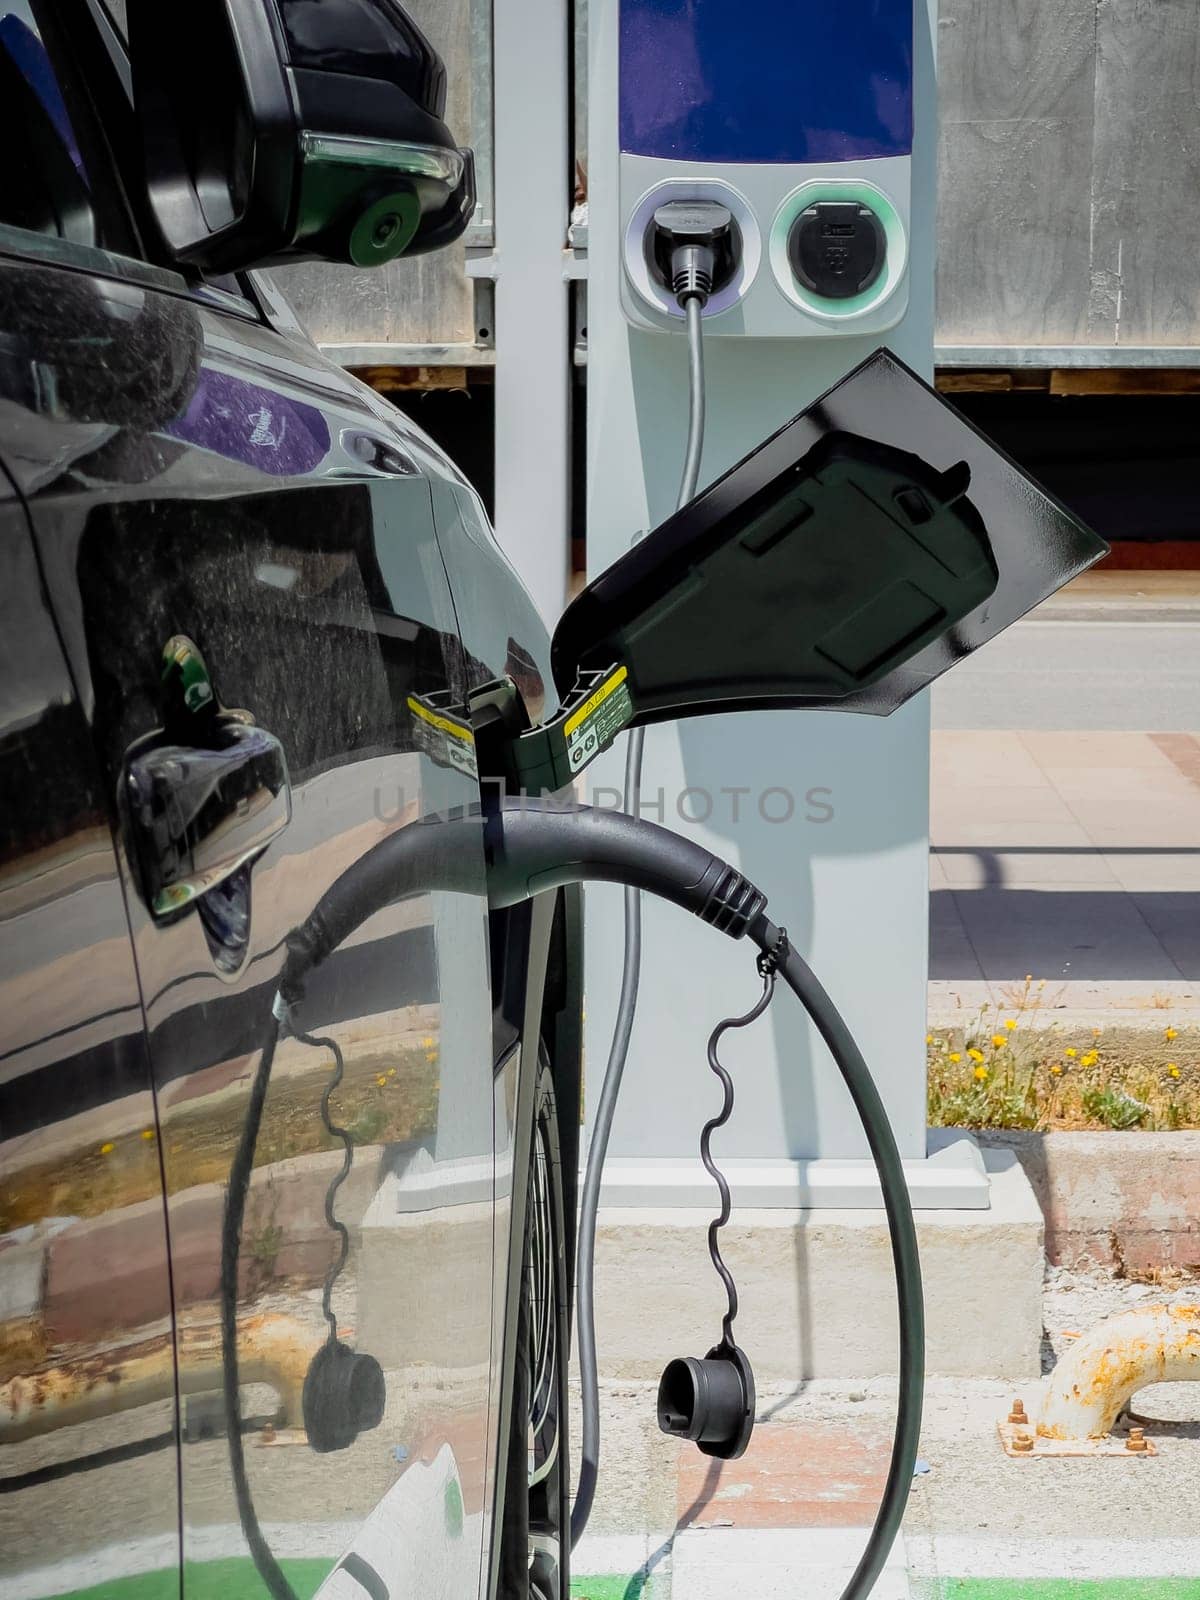 An electric car charging at the Electric vehicle charging station in the parking lot